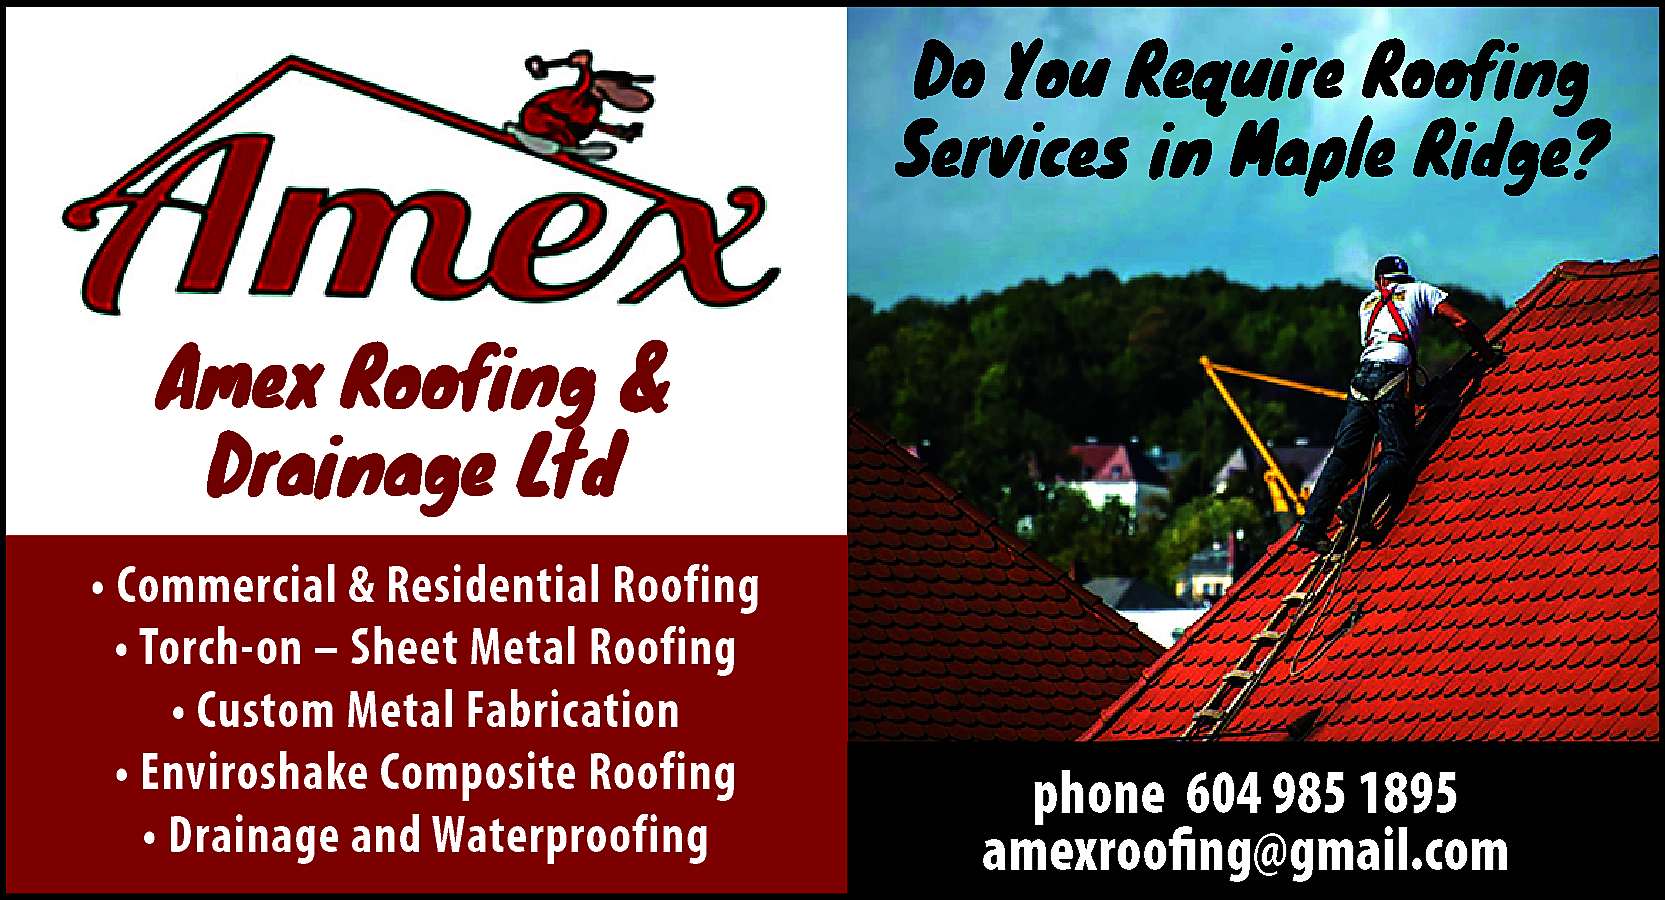 Do You Require Roofing <br>Services  Do You Require Roofing  Services in Maple Ridge?    Amex Roofing &  Drainage Ltd  • Commercial & Residential Roofing  • Torch-on – Sheet Metal Roofing  • Custom Metal Fabrication  • Enviroshake Composite Roofing  • Drainage and Waterproofing    phone 604 985 1895  amexroofing@gmail.com    